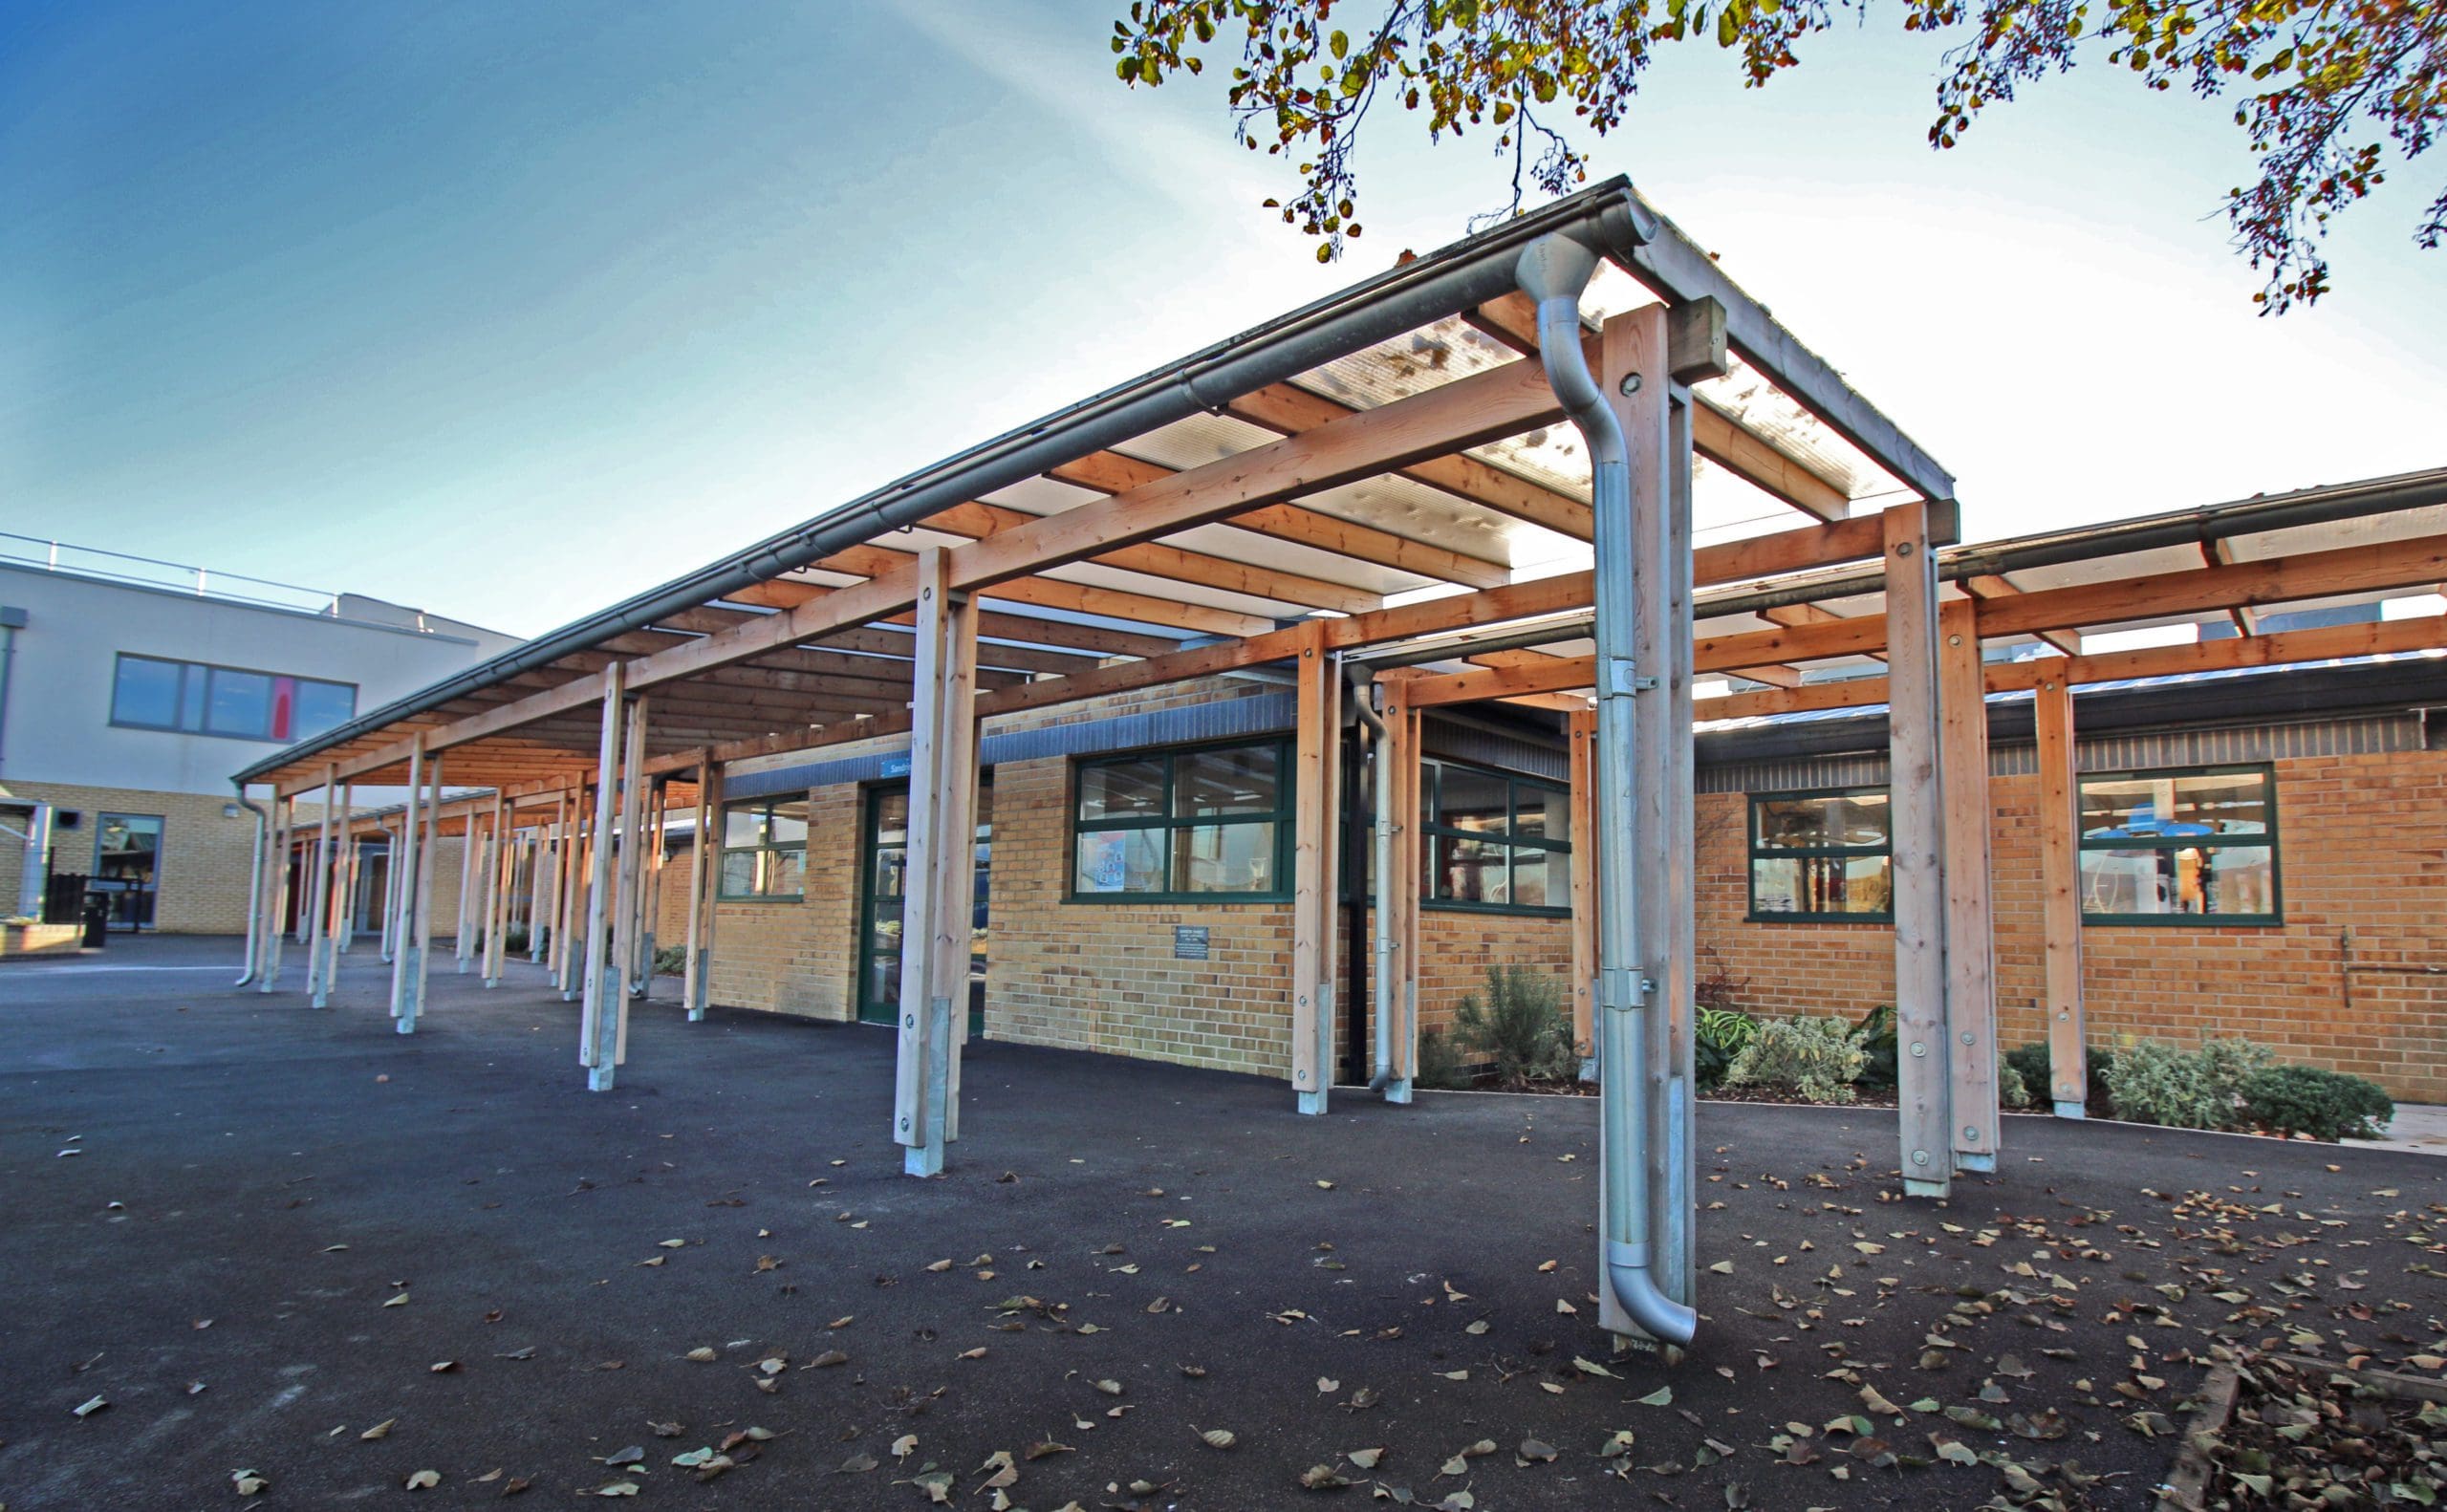 Exterior wooden pergola canopy with metal drainage